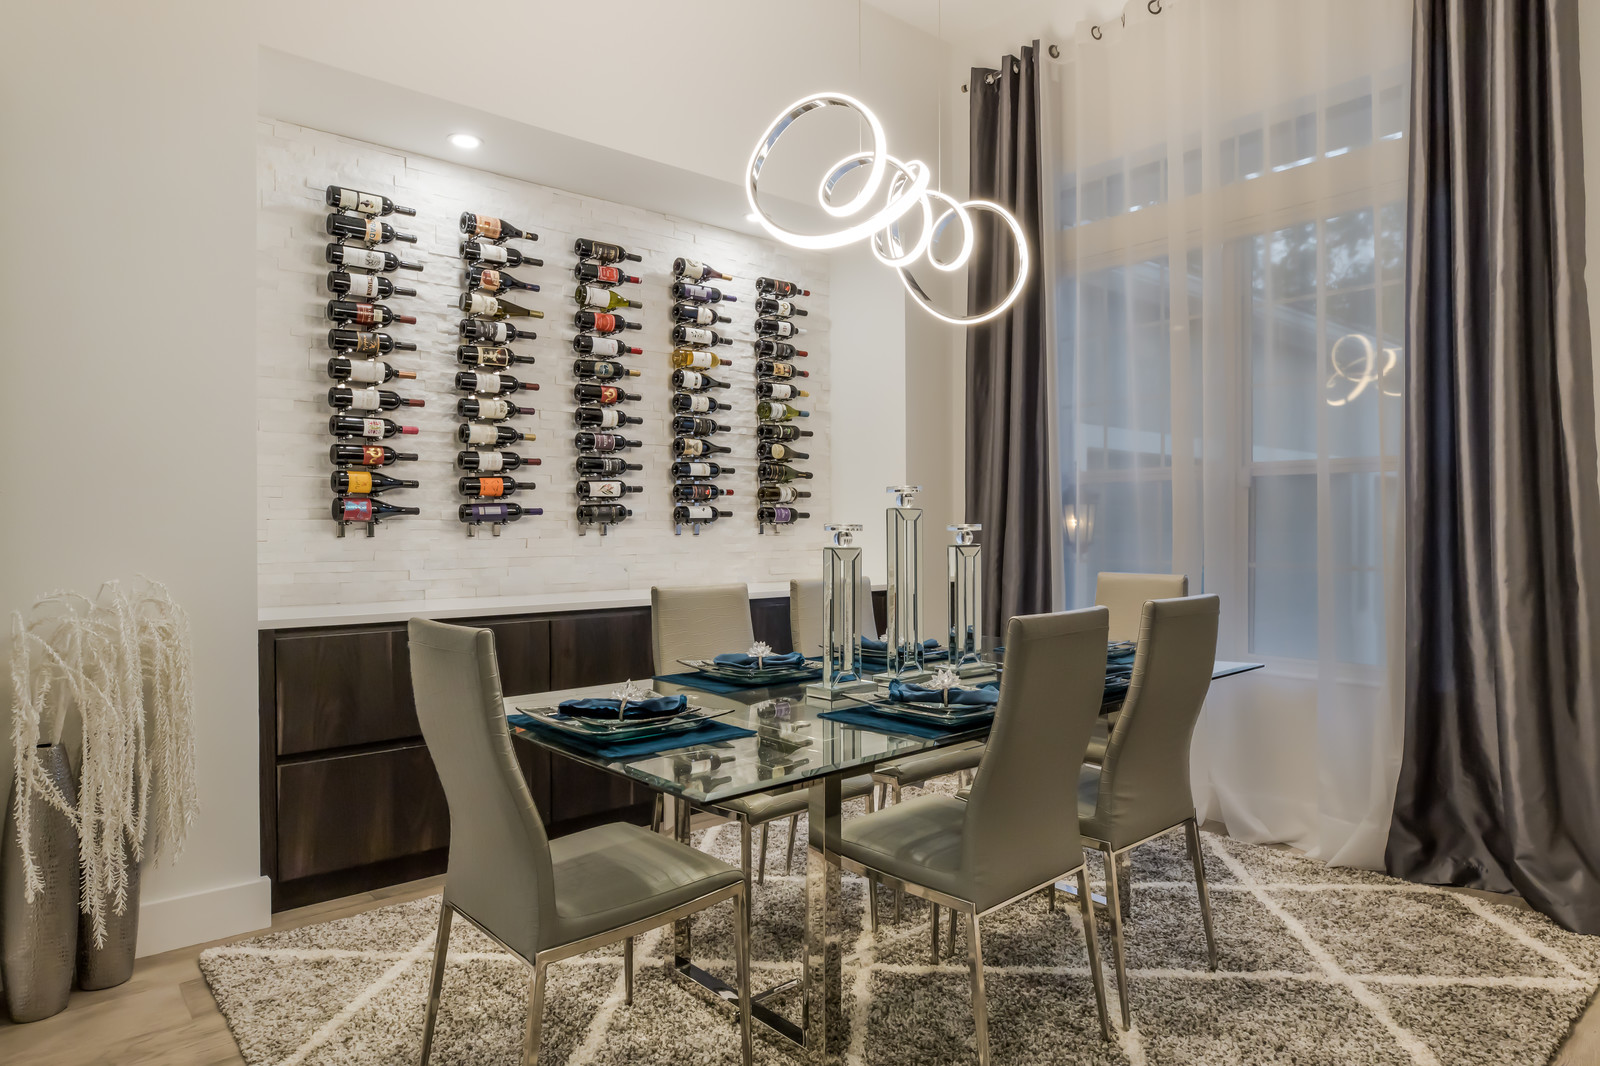 Dining area with wine wall